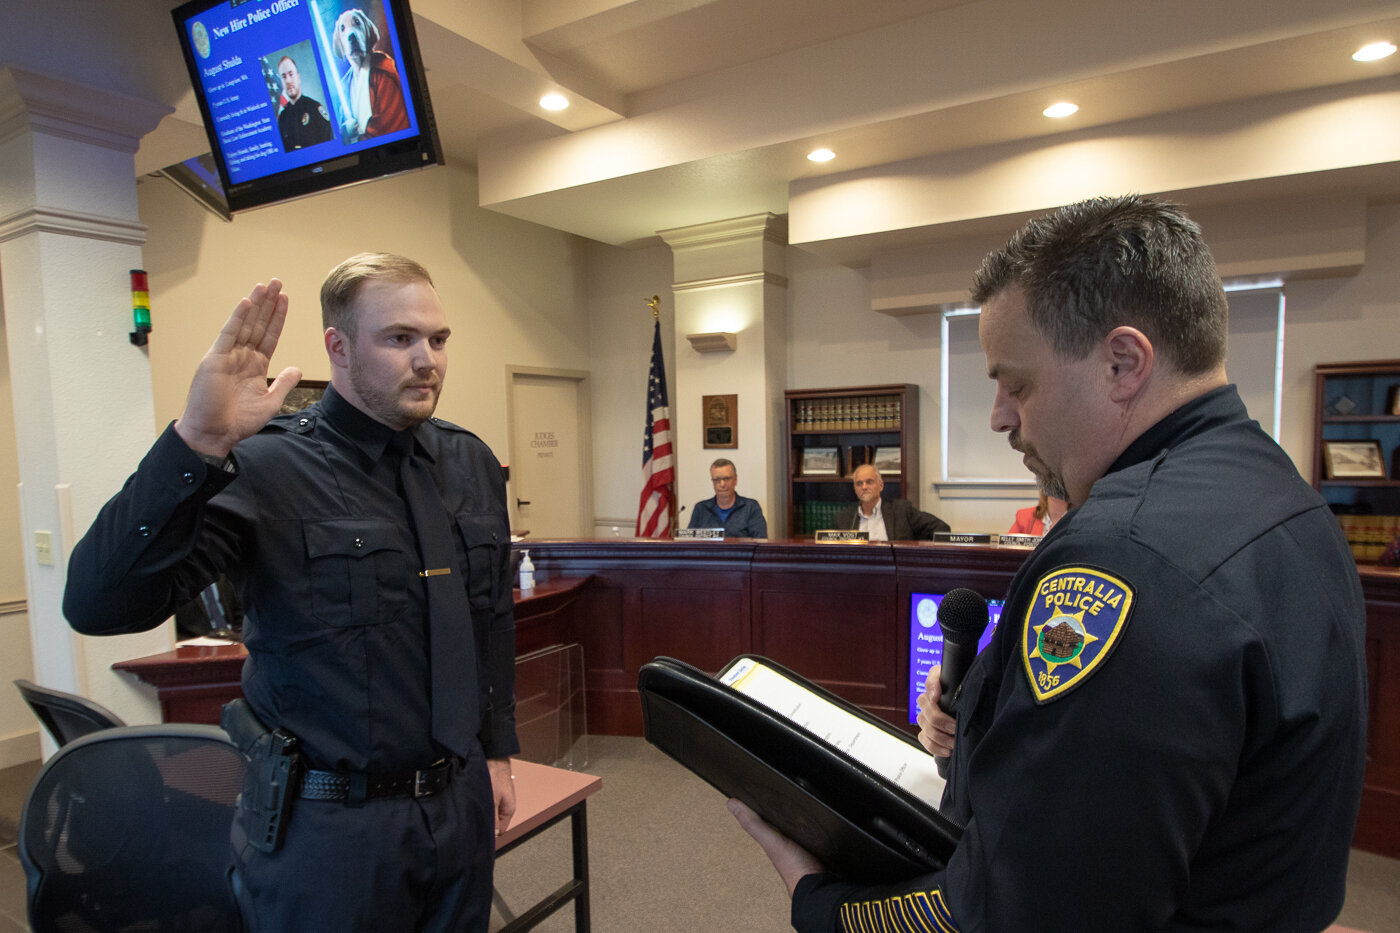 New Centralia Police Officer August Shulda is sworn in by Police Chief Stacy Denham Tuesday night at Centralia City Hall.